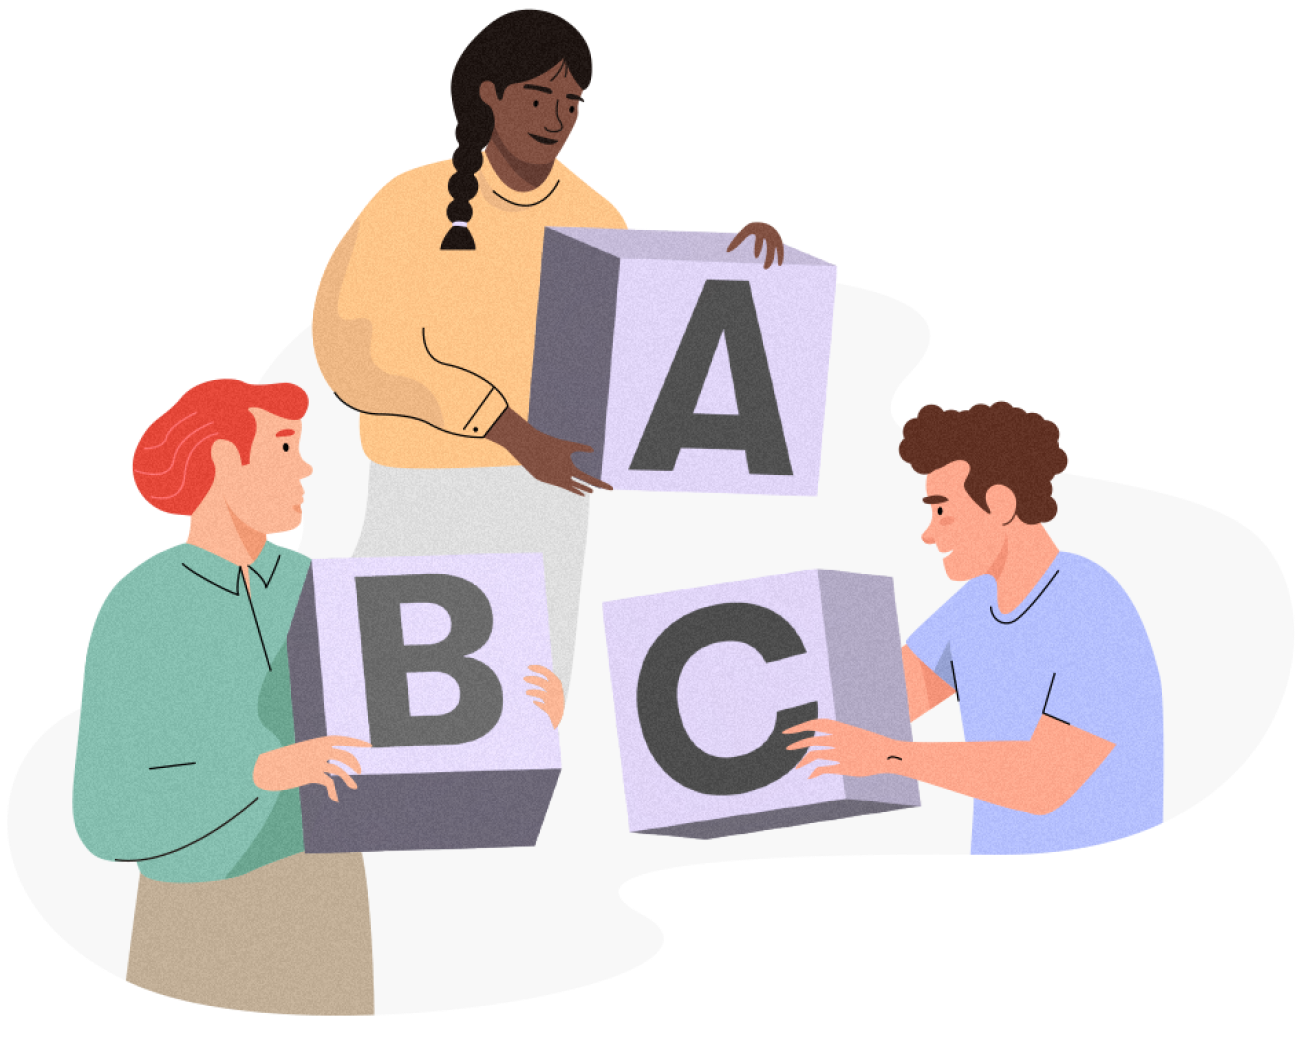 3 people holding A, B and C letters